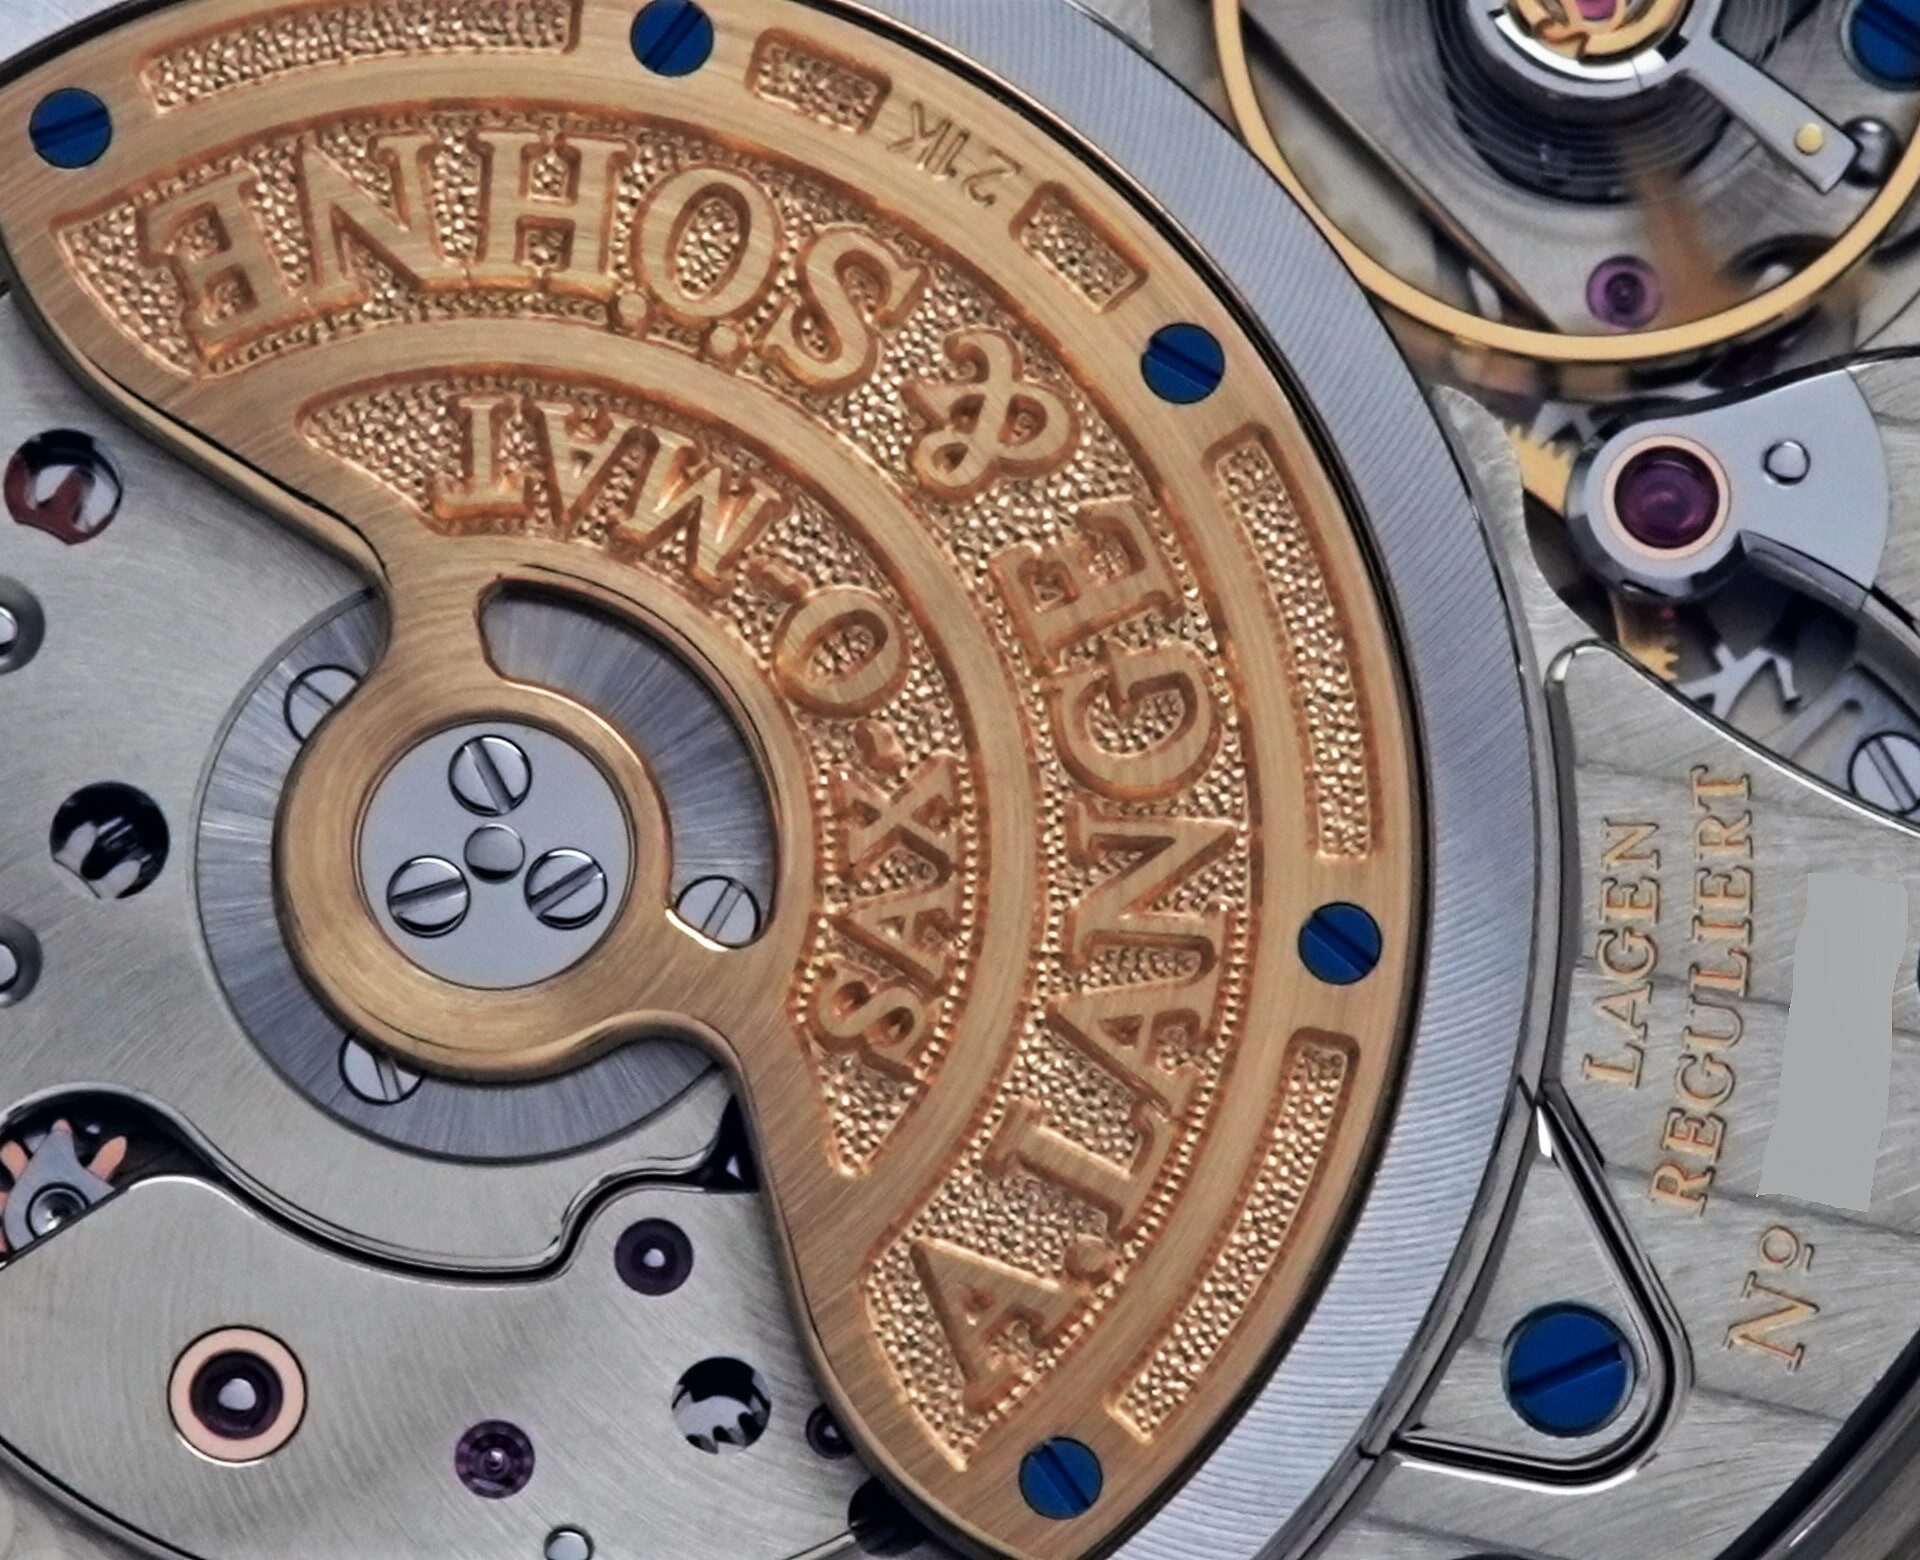 Zoomed in shot of the back side of the A. Lange & Söhne Saxonia Annual Calendar watch.